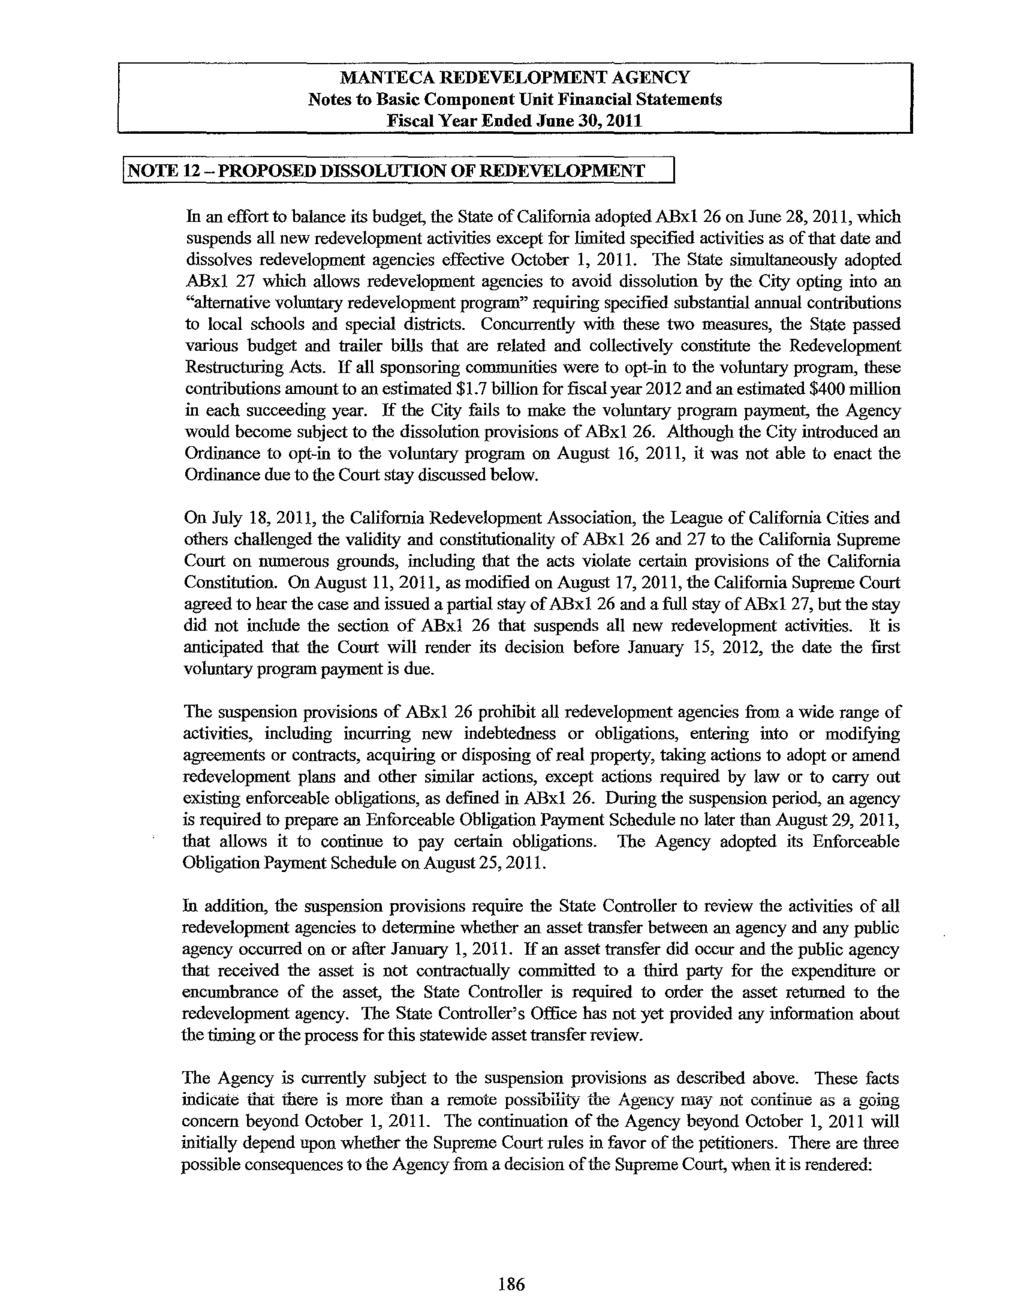 MANTECA REDEVELOPMENT AGENCY Notes to Basic Component Unit Financial Statements Fiscal Year Ended June 30, 2011 I NOTE 12 - PROPOSED DISSOLUTION OF REDEVELOPMENT In an effort to balance its budget,